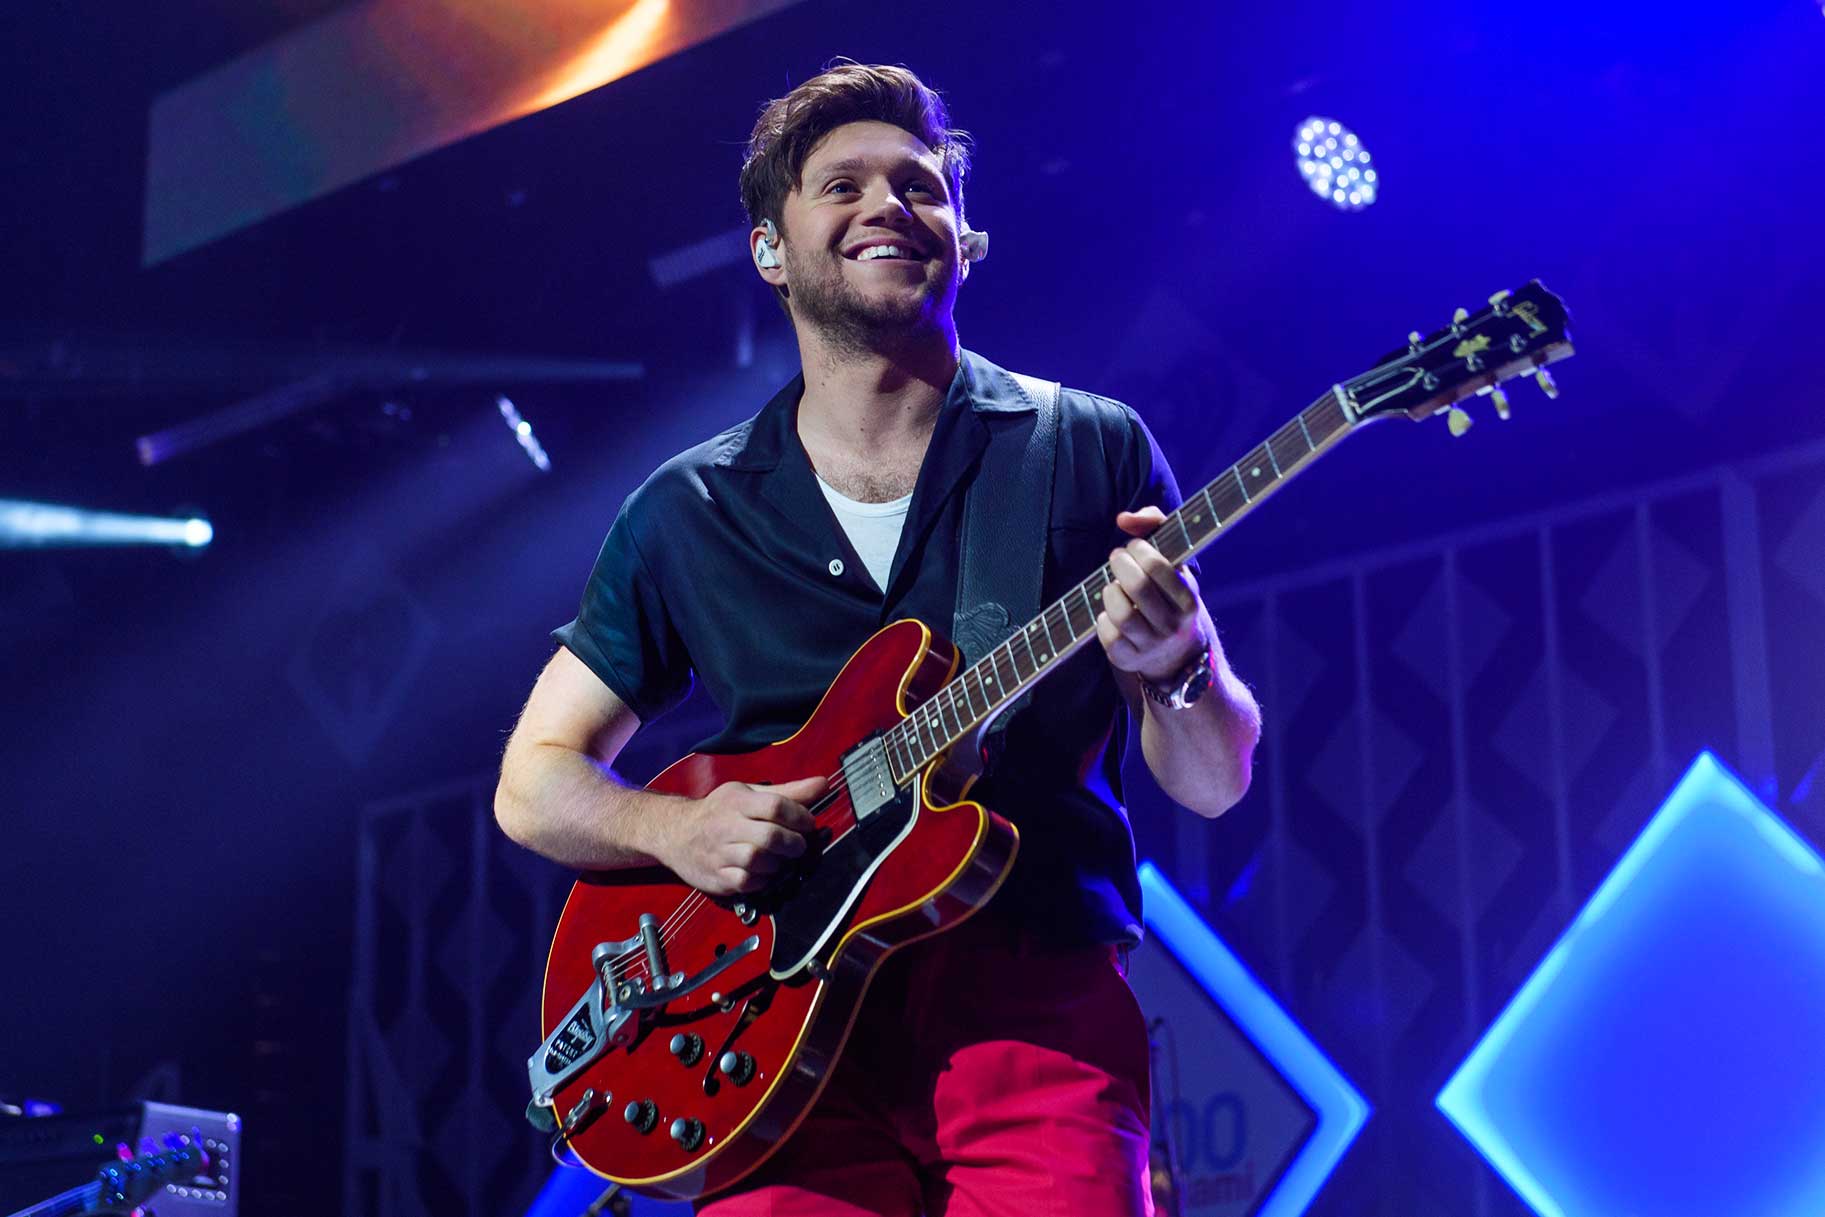 Niall Horan smiling and performing on stage at the Y100 2019 Jingle Ball.